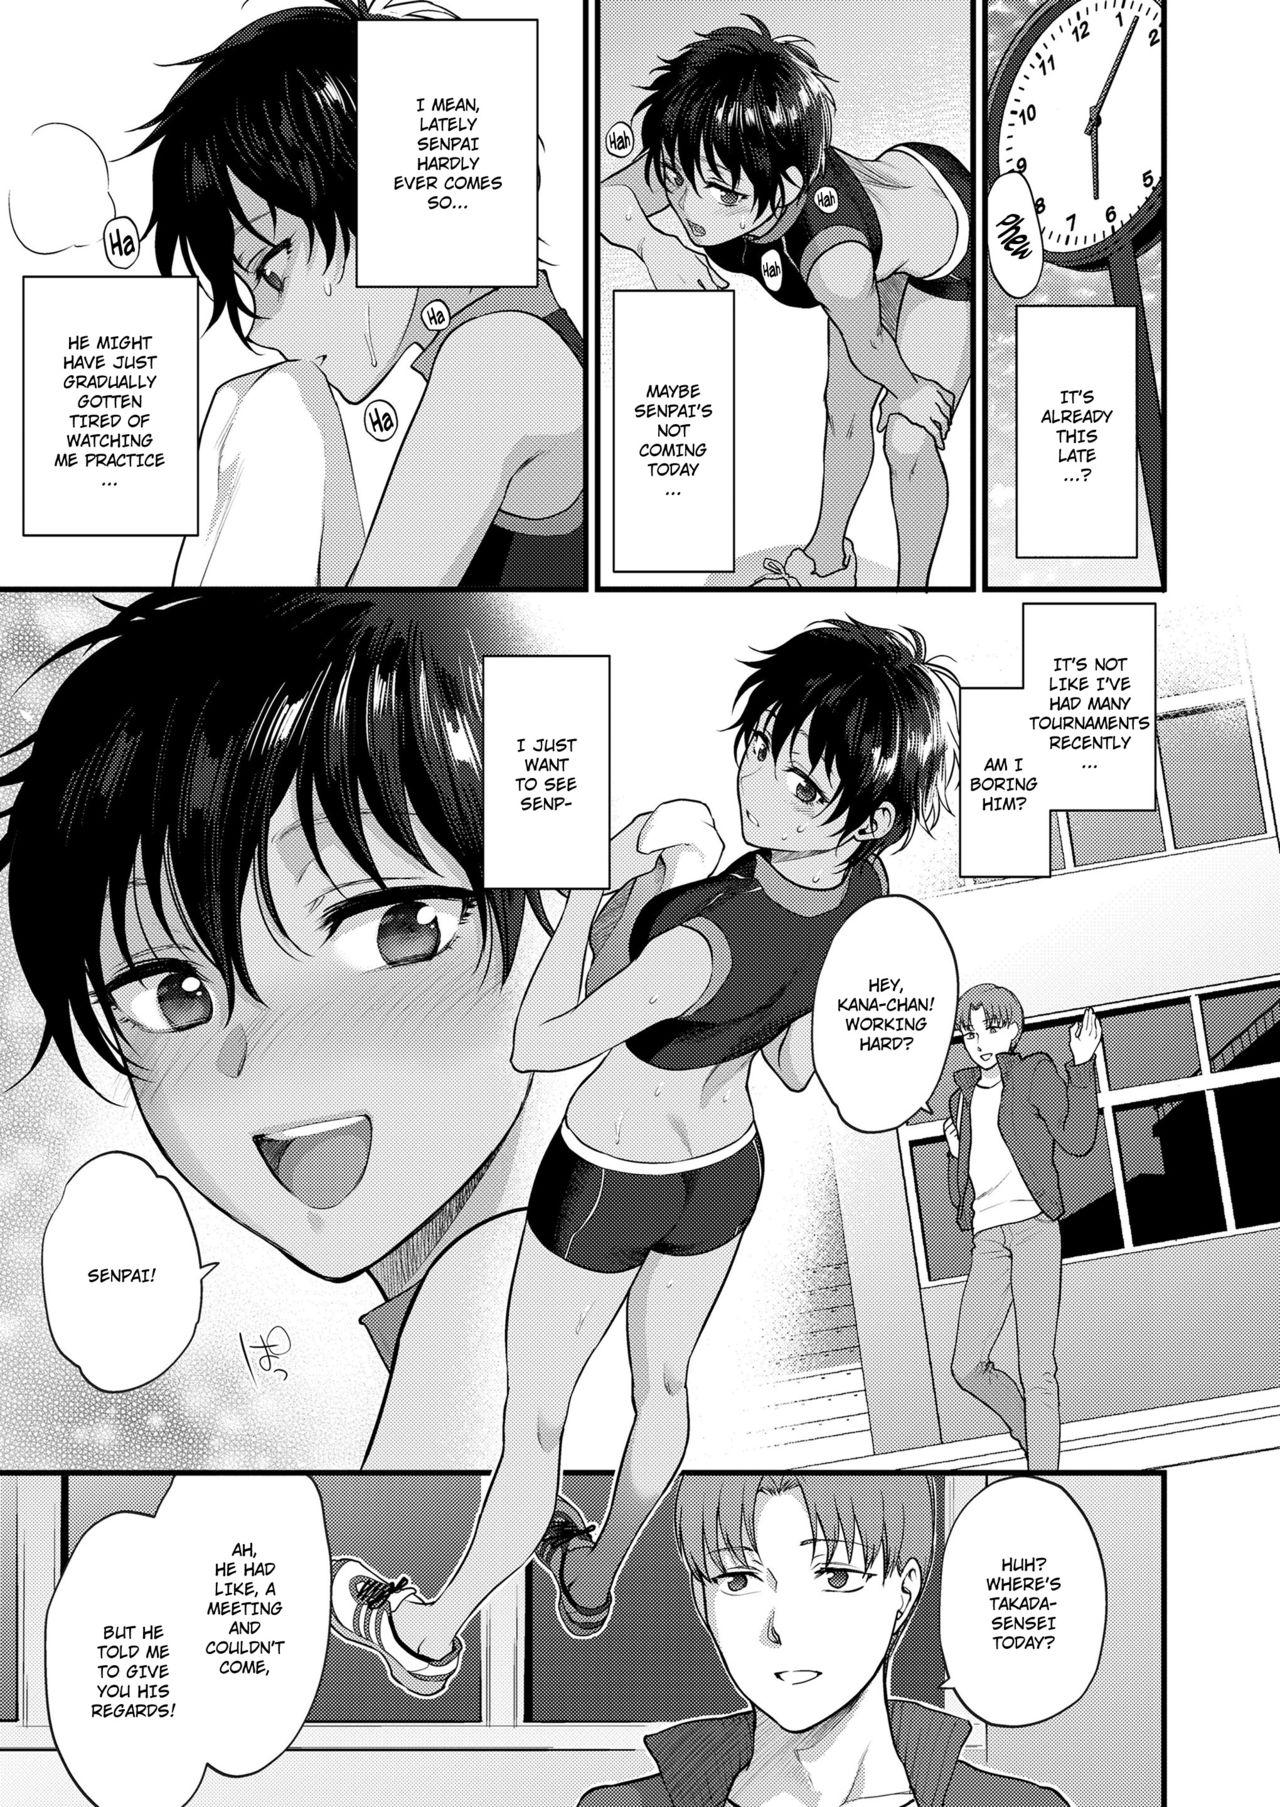 Snatch Watashi no Koto dake Mite Hoshii | I Want You to Look at Me Only Nude - Page 5